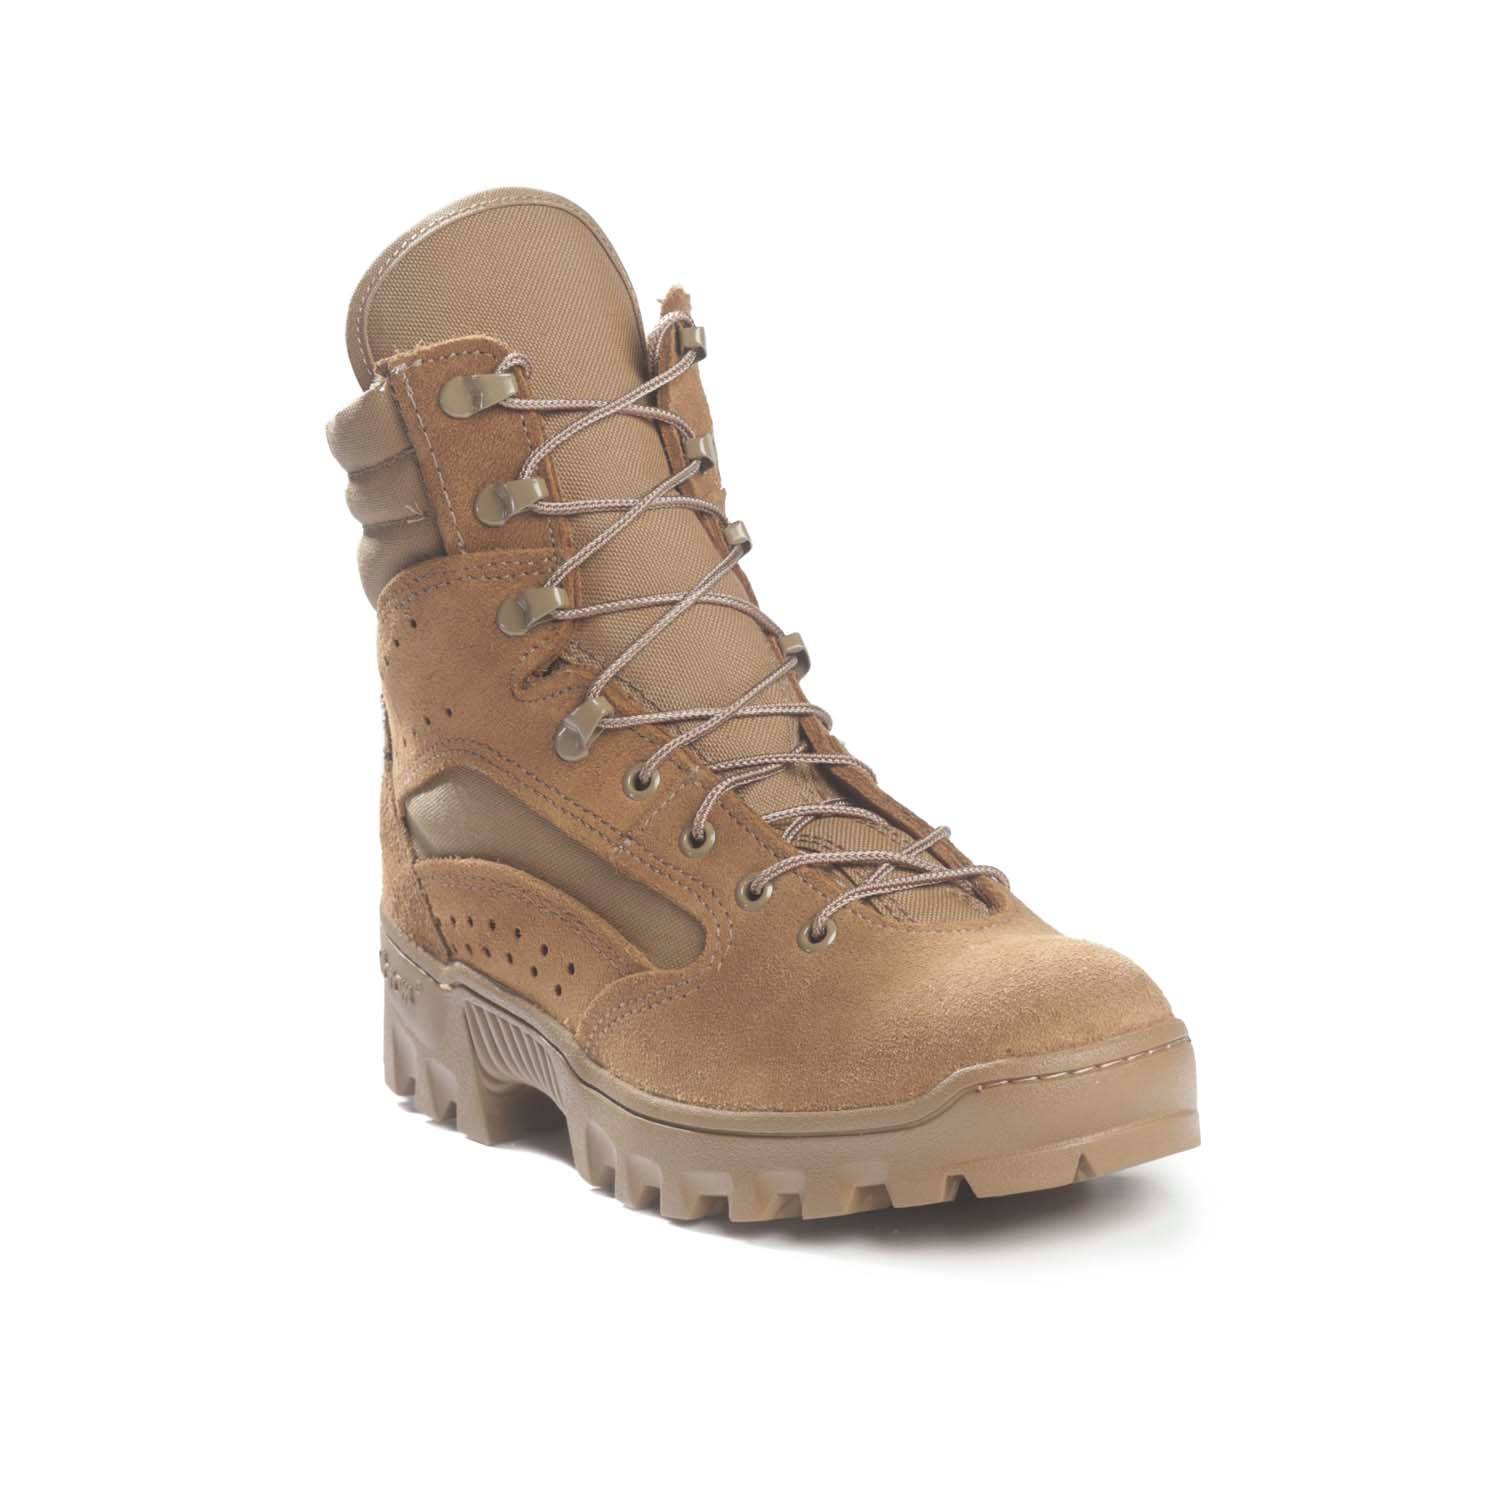 Details about   Altama military Combat Boots Mens Hot Weather Tan Size 9XW New 